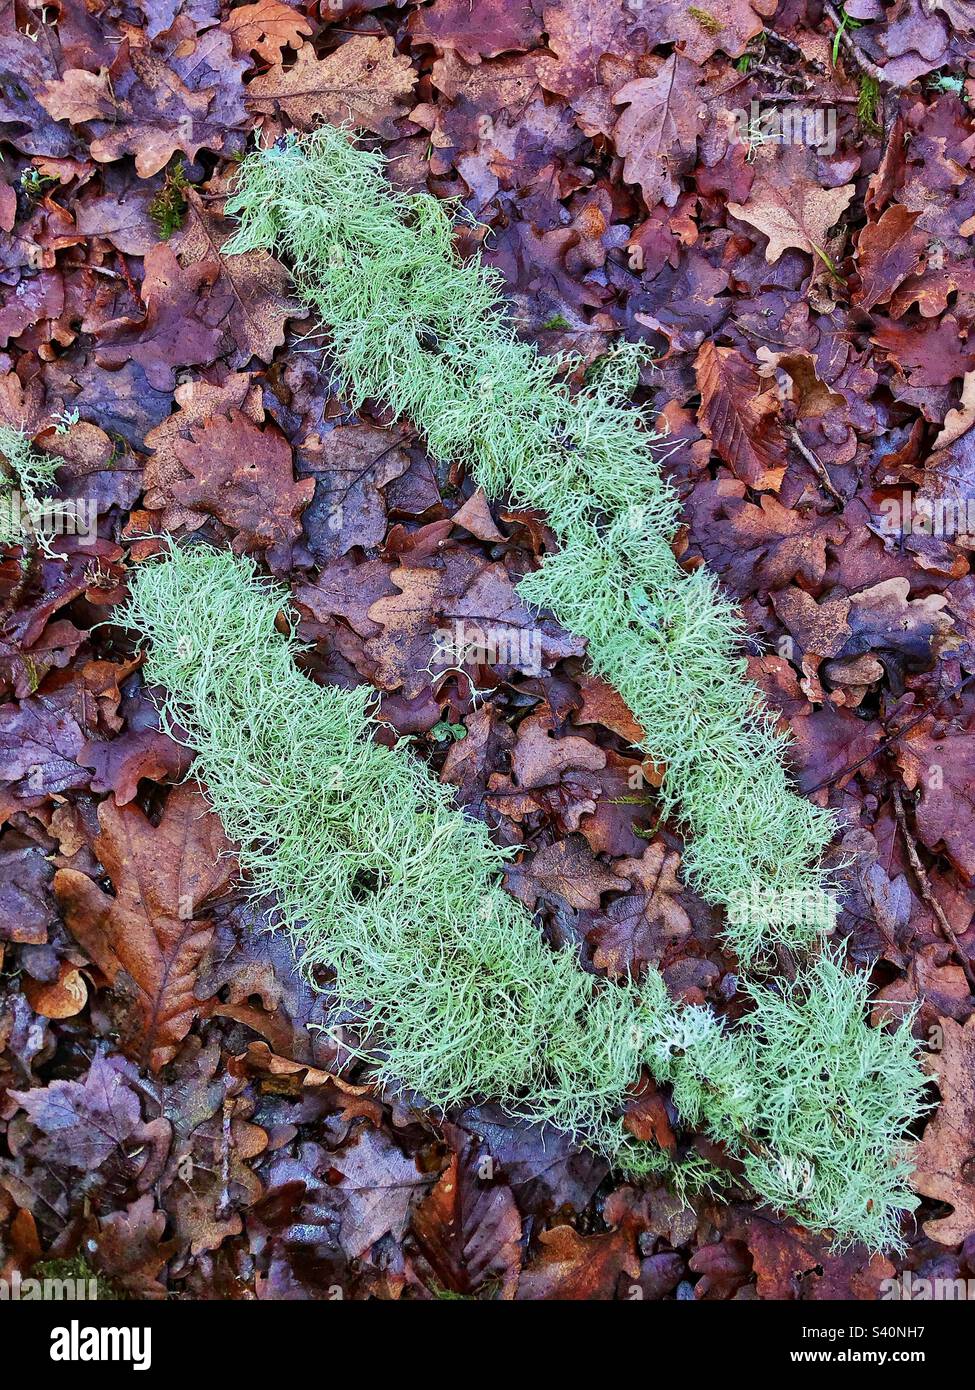 Beard lichen growing on a fallen branch in the New Forest National Park Stock Photo